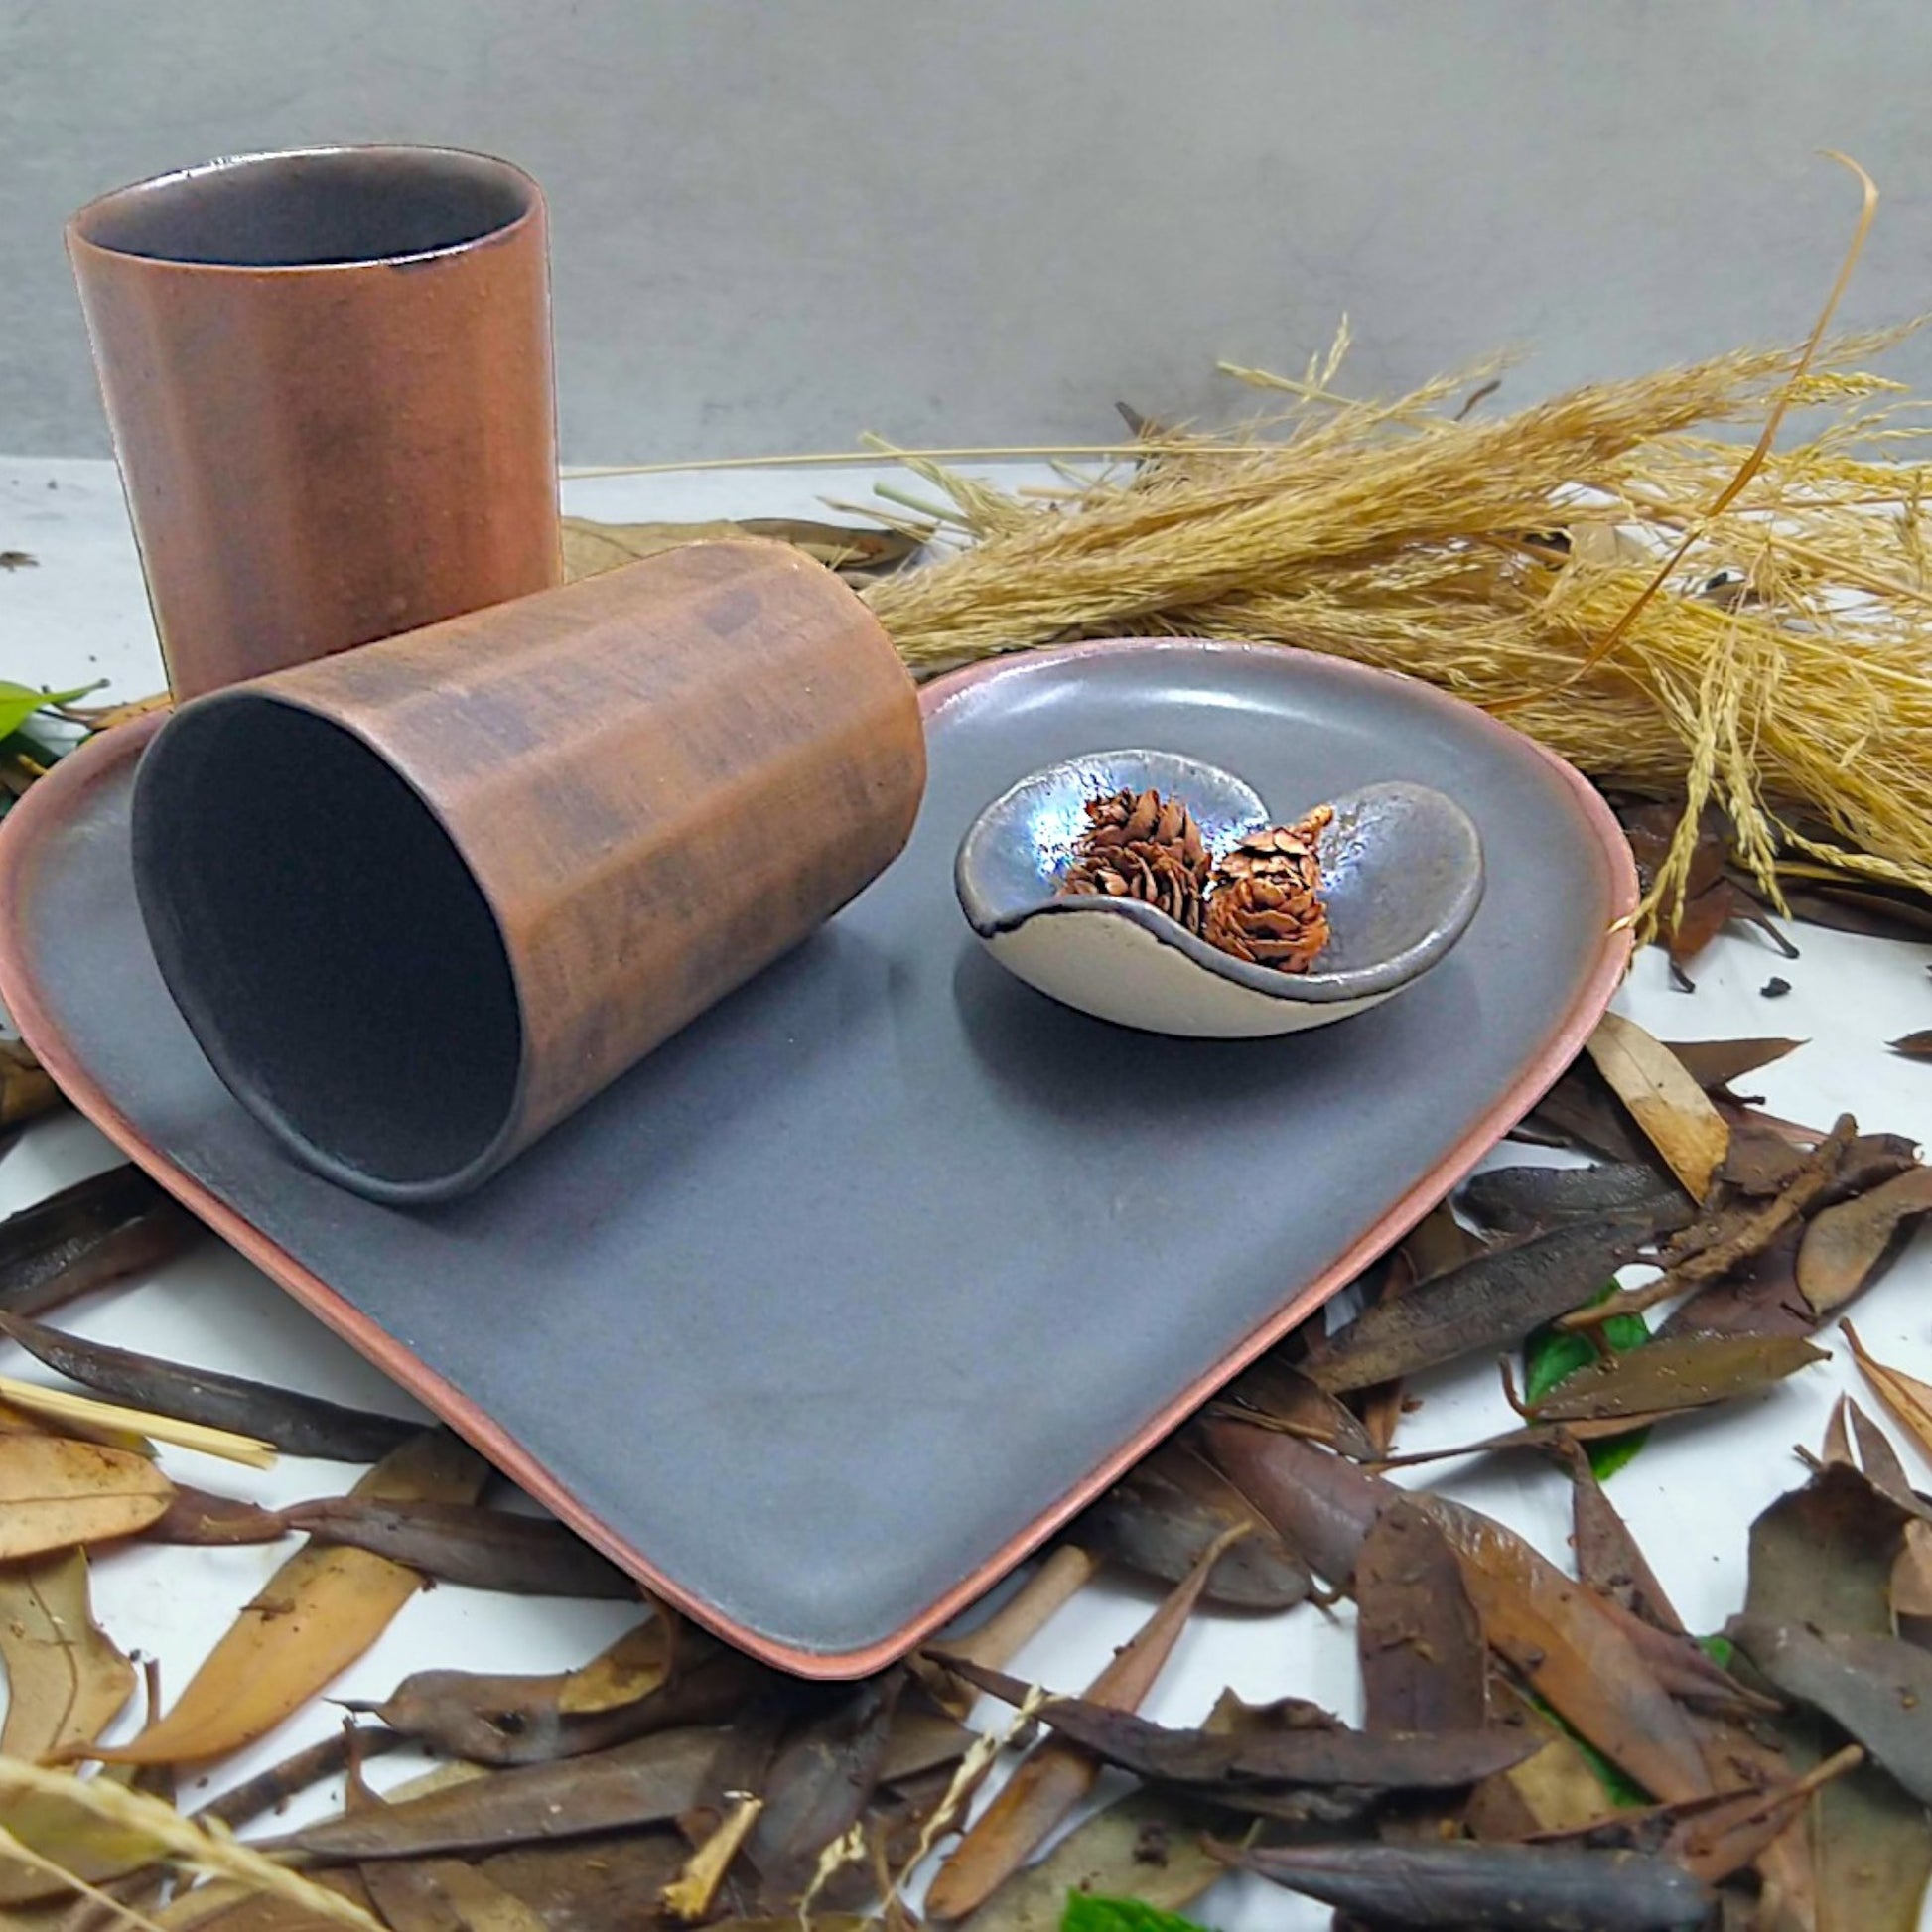 Chocolate brown ceramic heart-shaped platter, glasses and bowl set